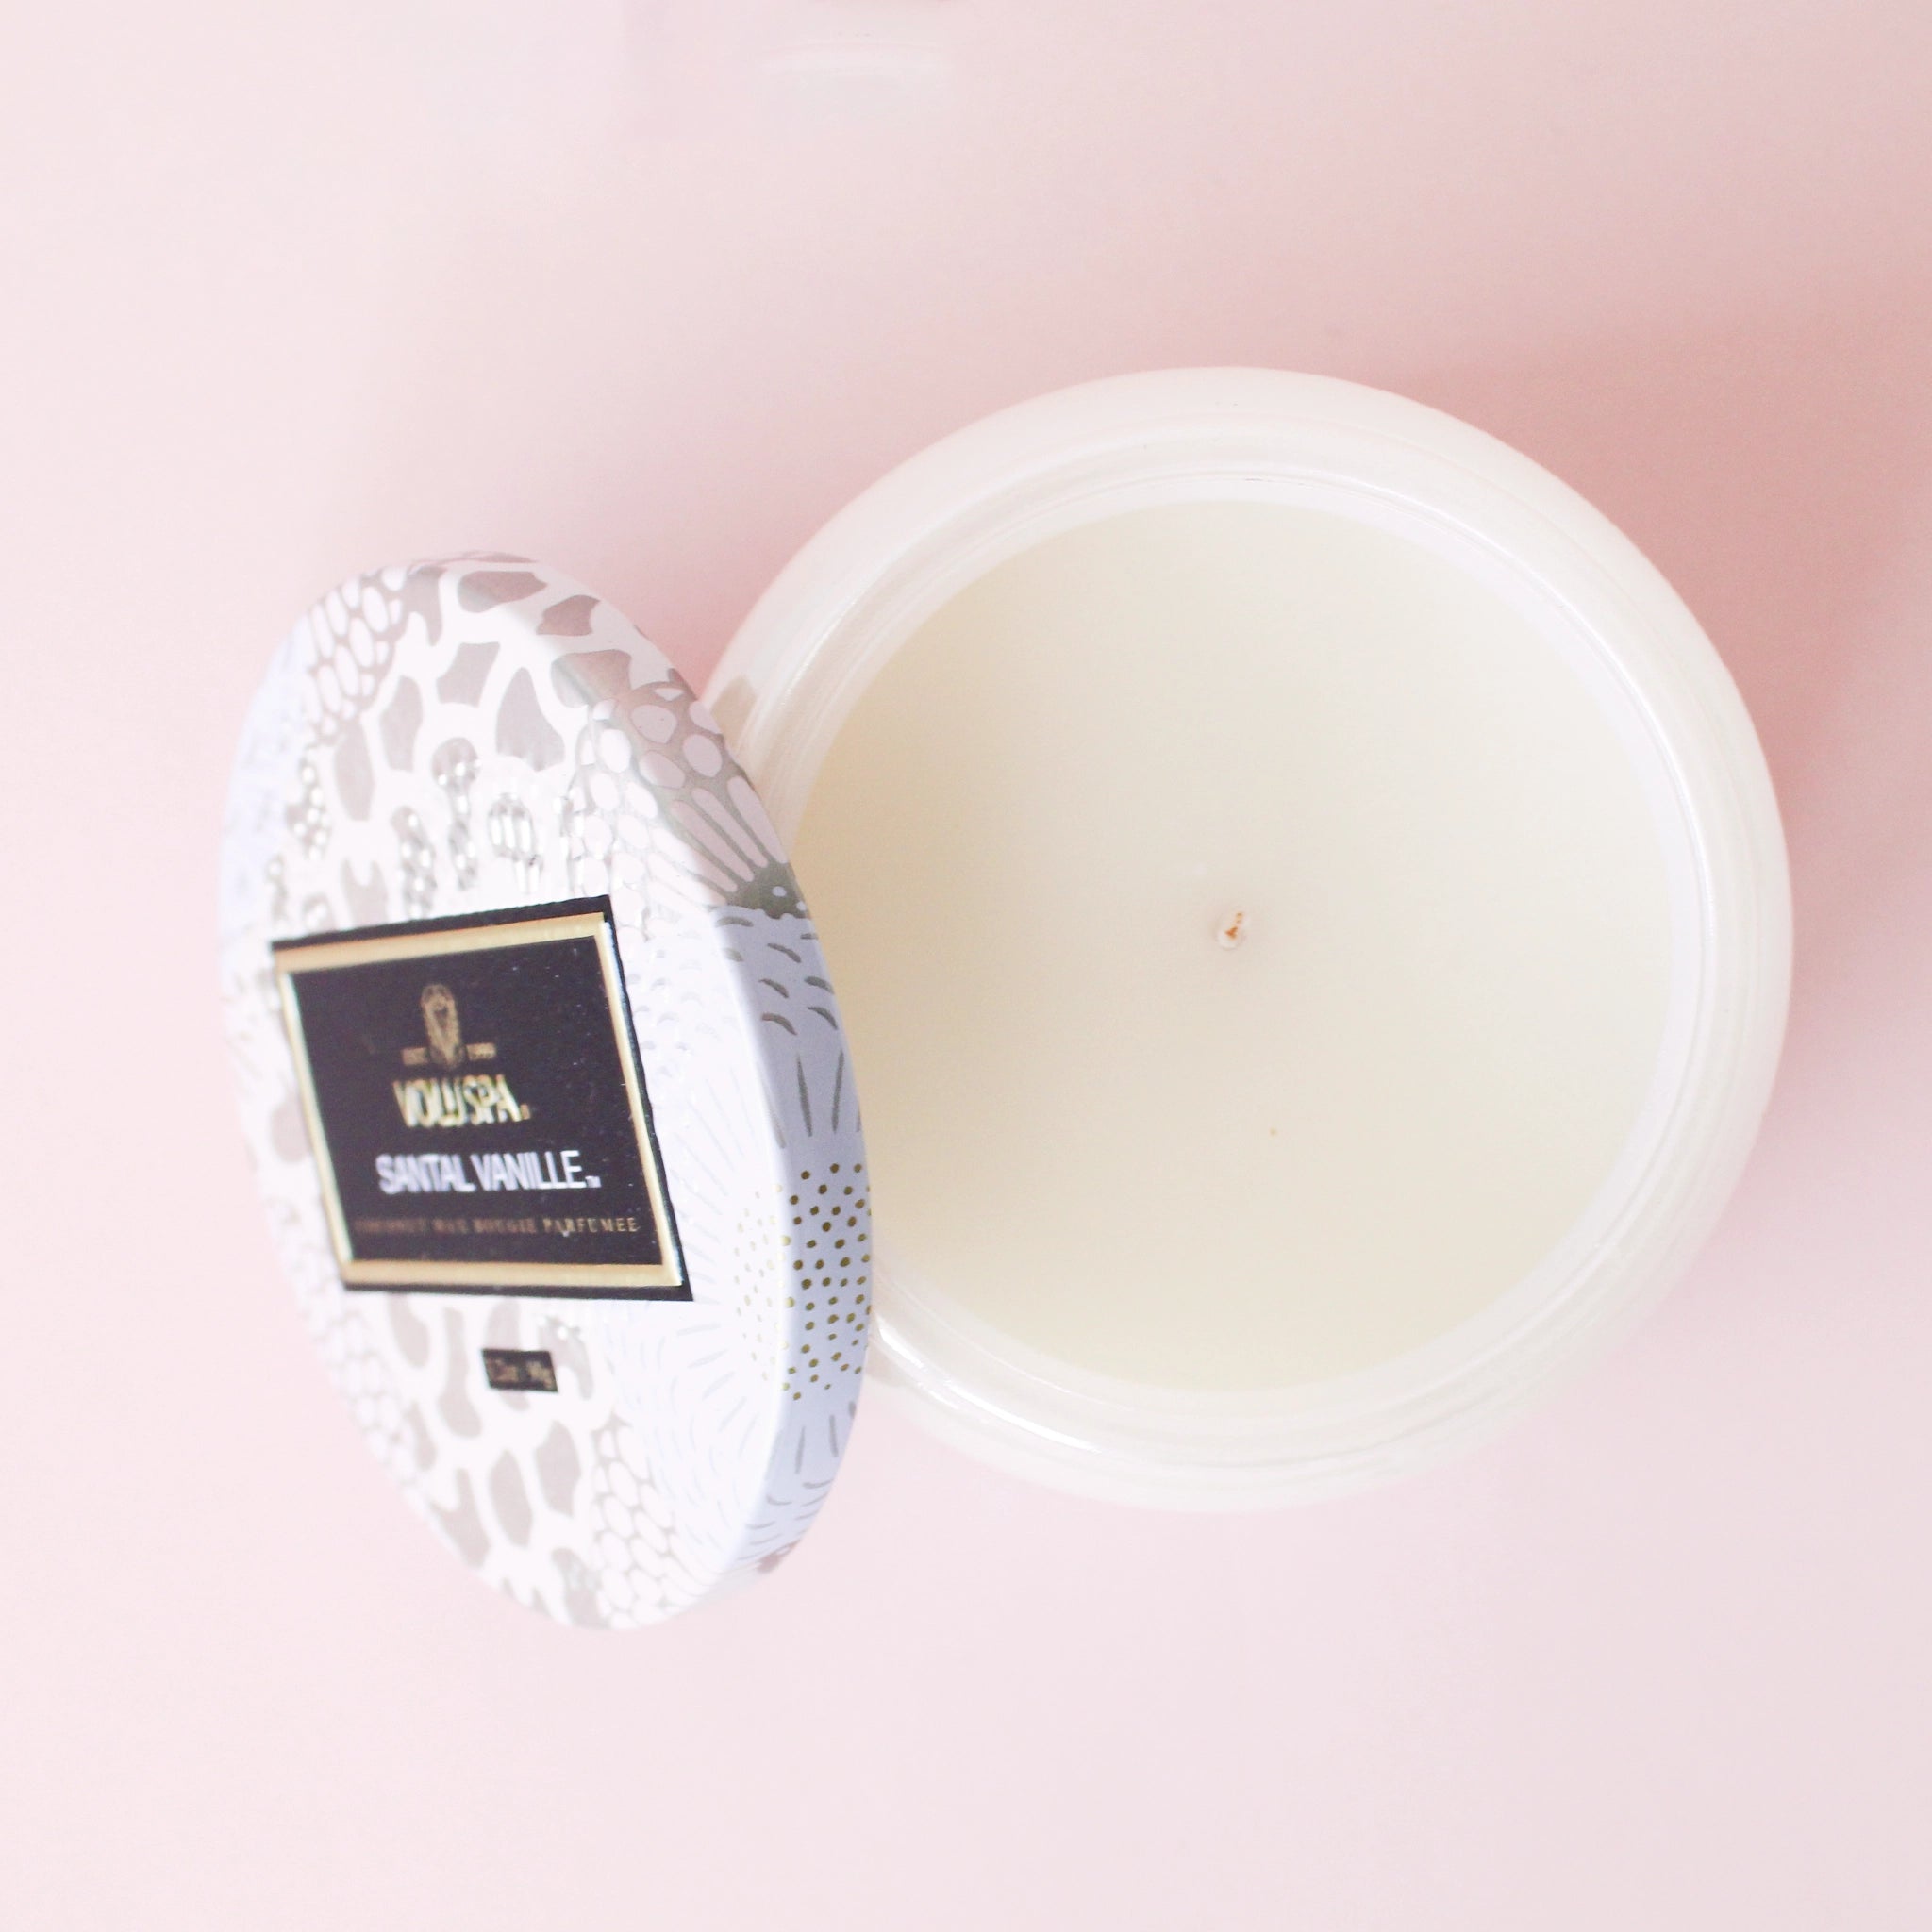 Birds eye view of a cylinder candle. The candle is white with a white wick in the center. Leaning against the left side is the round tin lid. The lid is light pink, lavender and silver floral pattern. In the middle is a black rectangular sticker. Inside the sticker is gold text that reads ‘voluspa.’ Below is white text that reads ’santal vanille.’